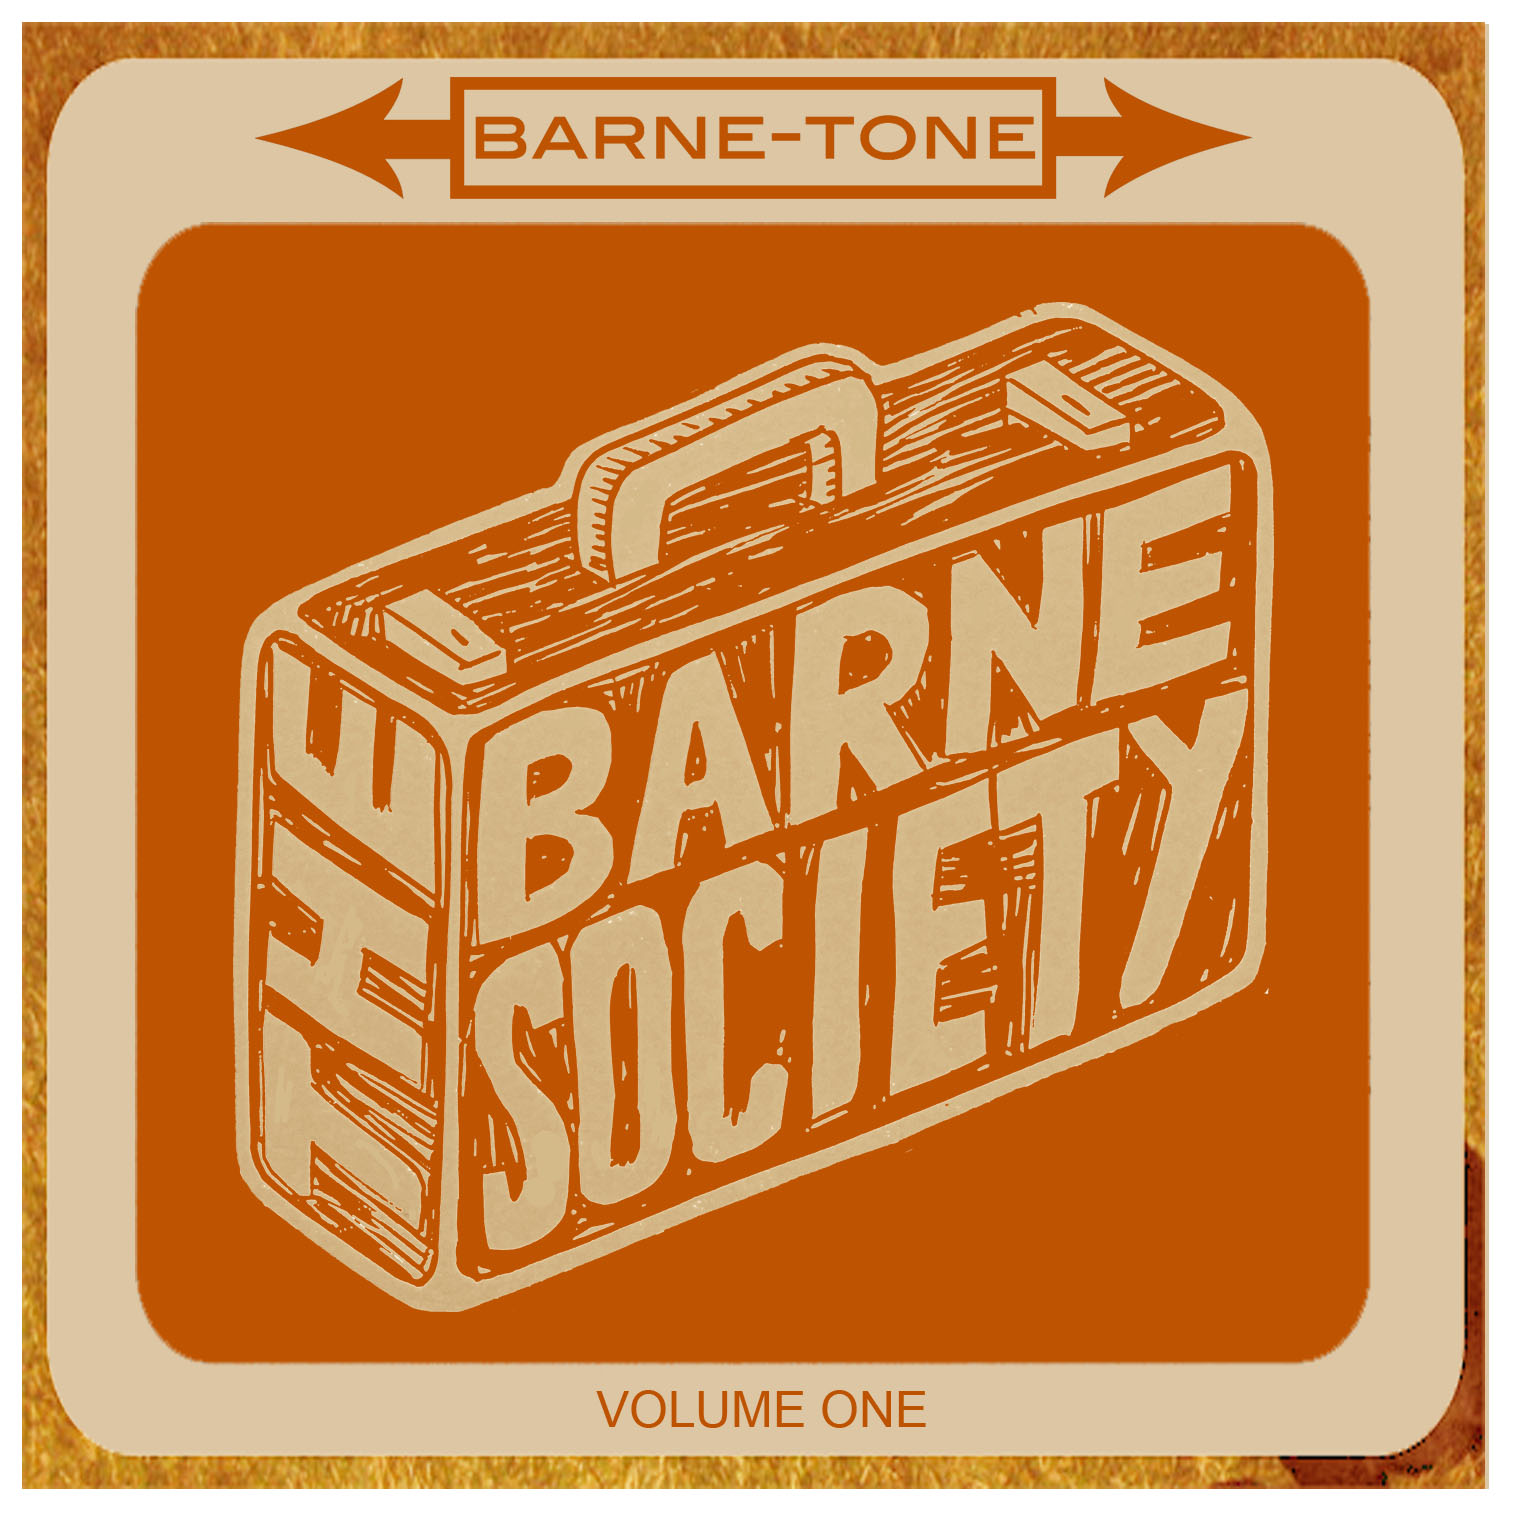 Introducing: The Barne Society 2